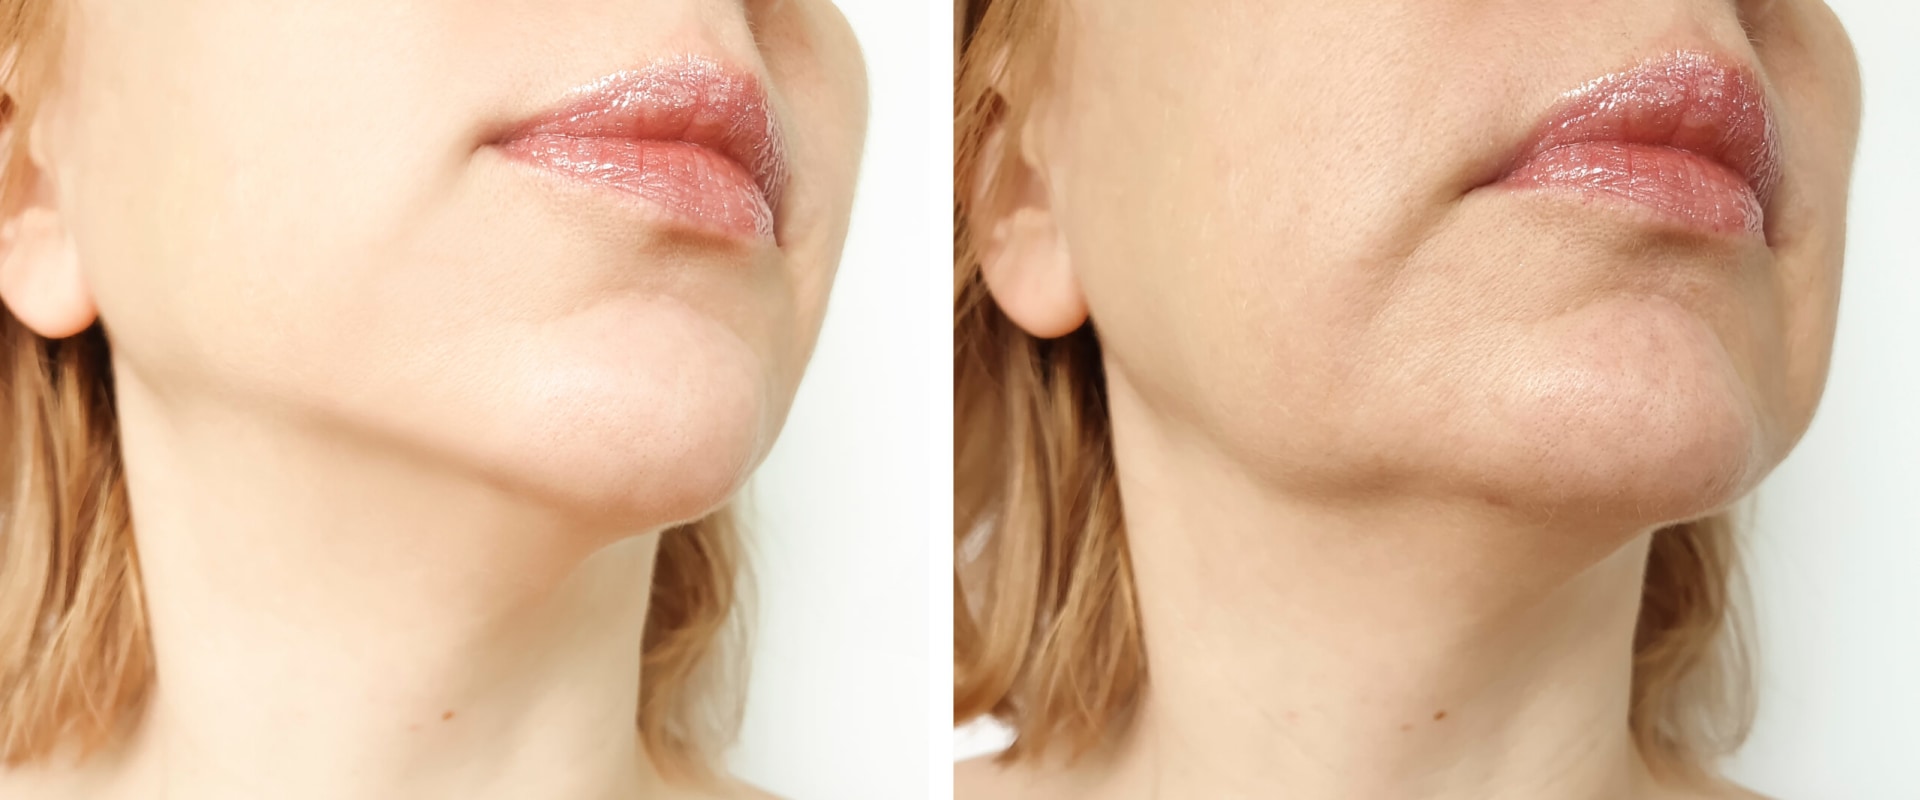 Can You See Results After One Morpheus8 Treatment?